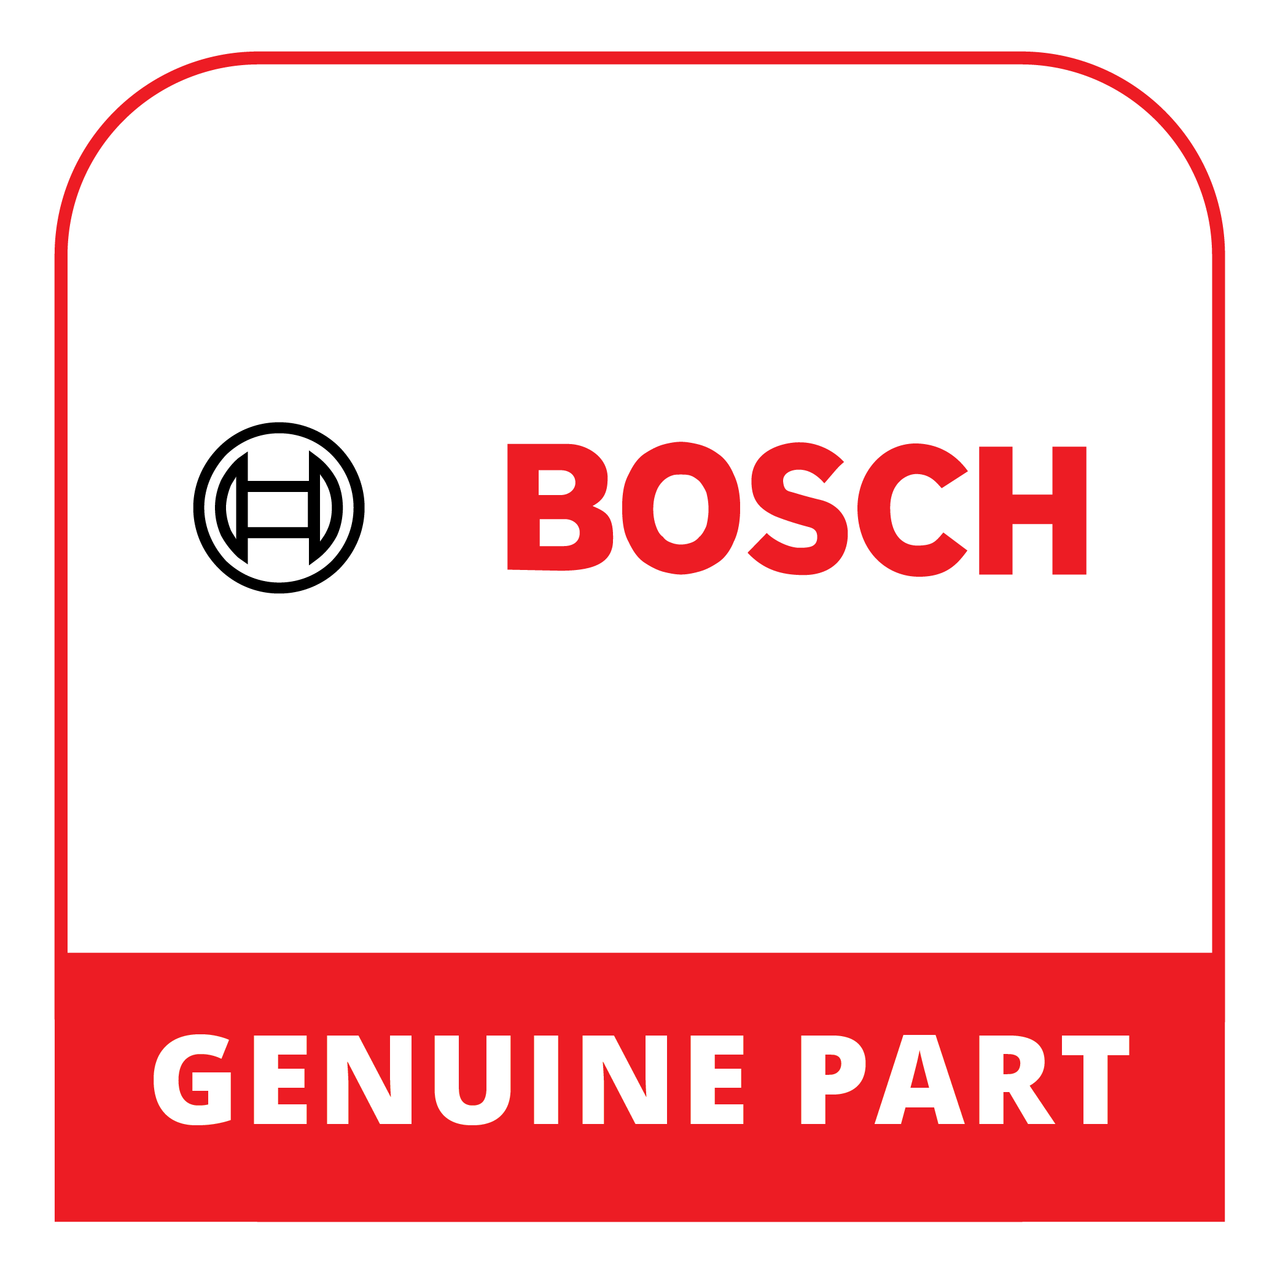 Bosch 12013560 - Handle-Cap Shaped - Genuine Bosch (Thermador) Part